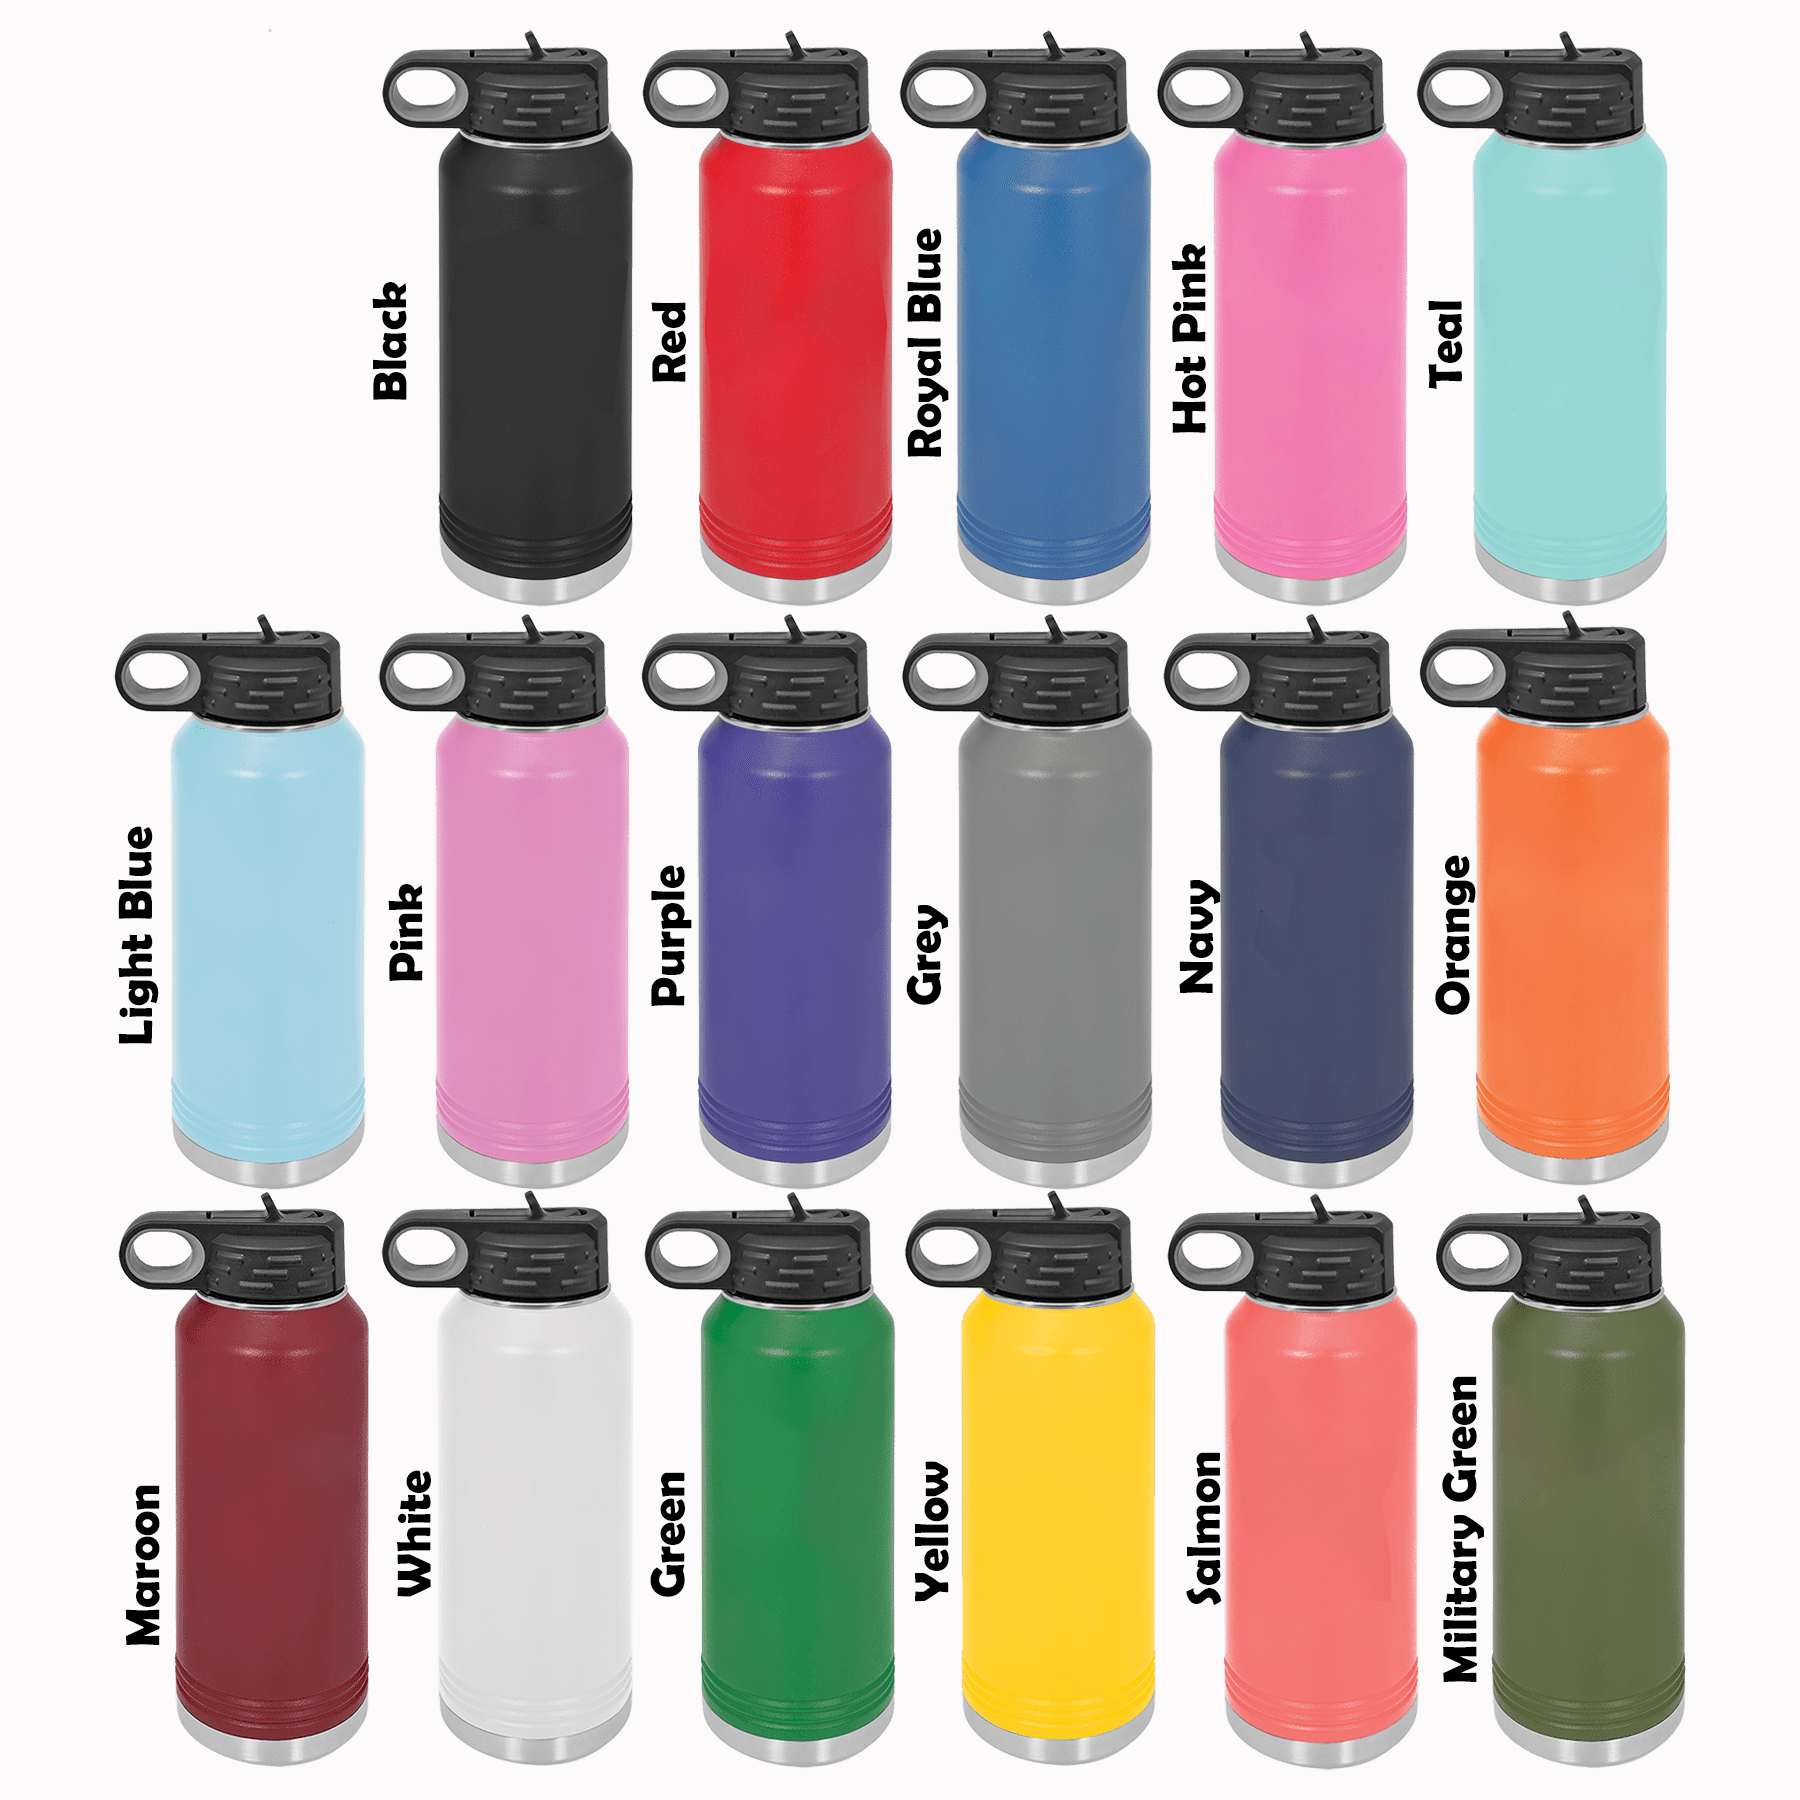 Black Personalized Water Bottle for Men - Groovy Guy Gifts